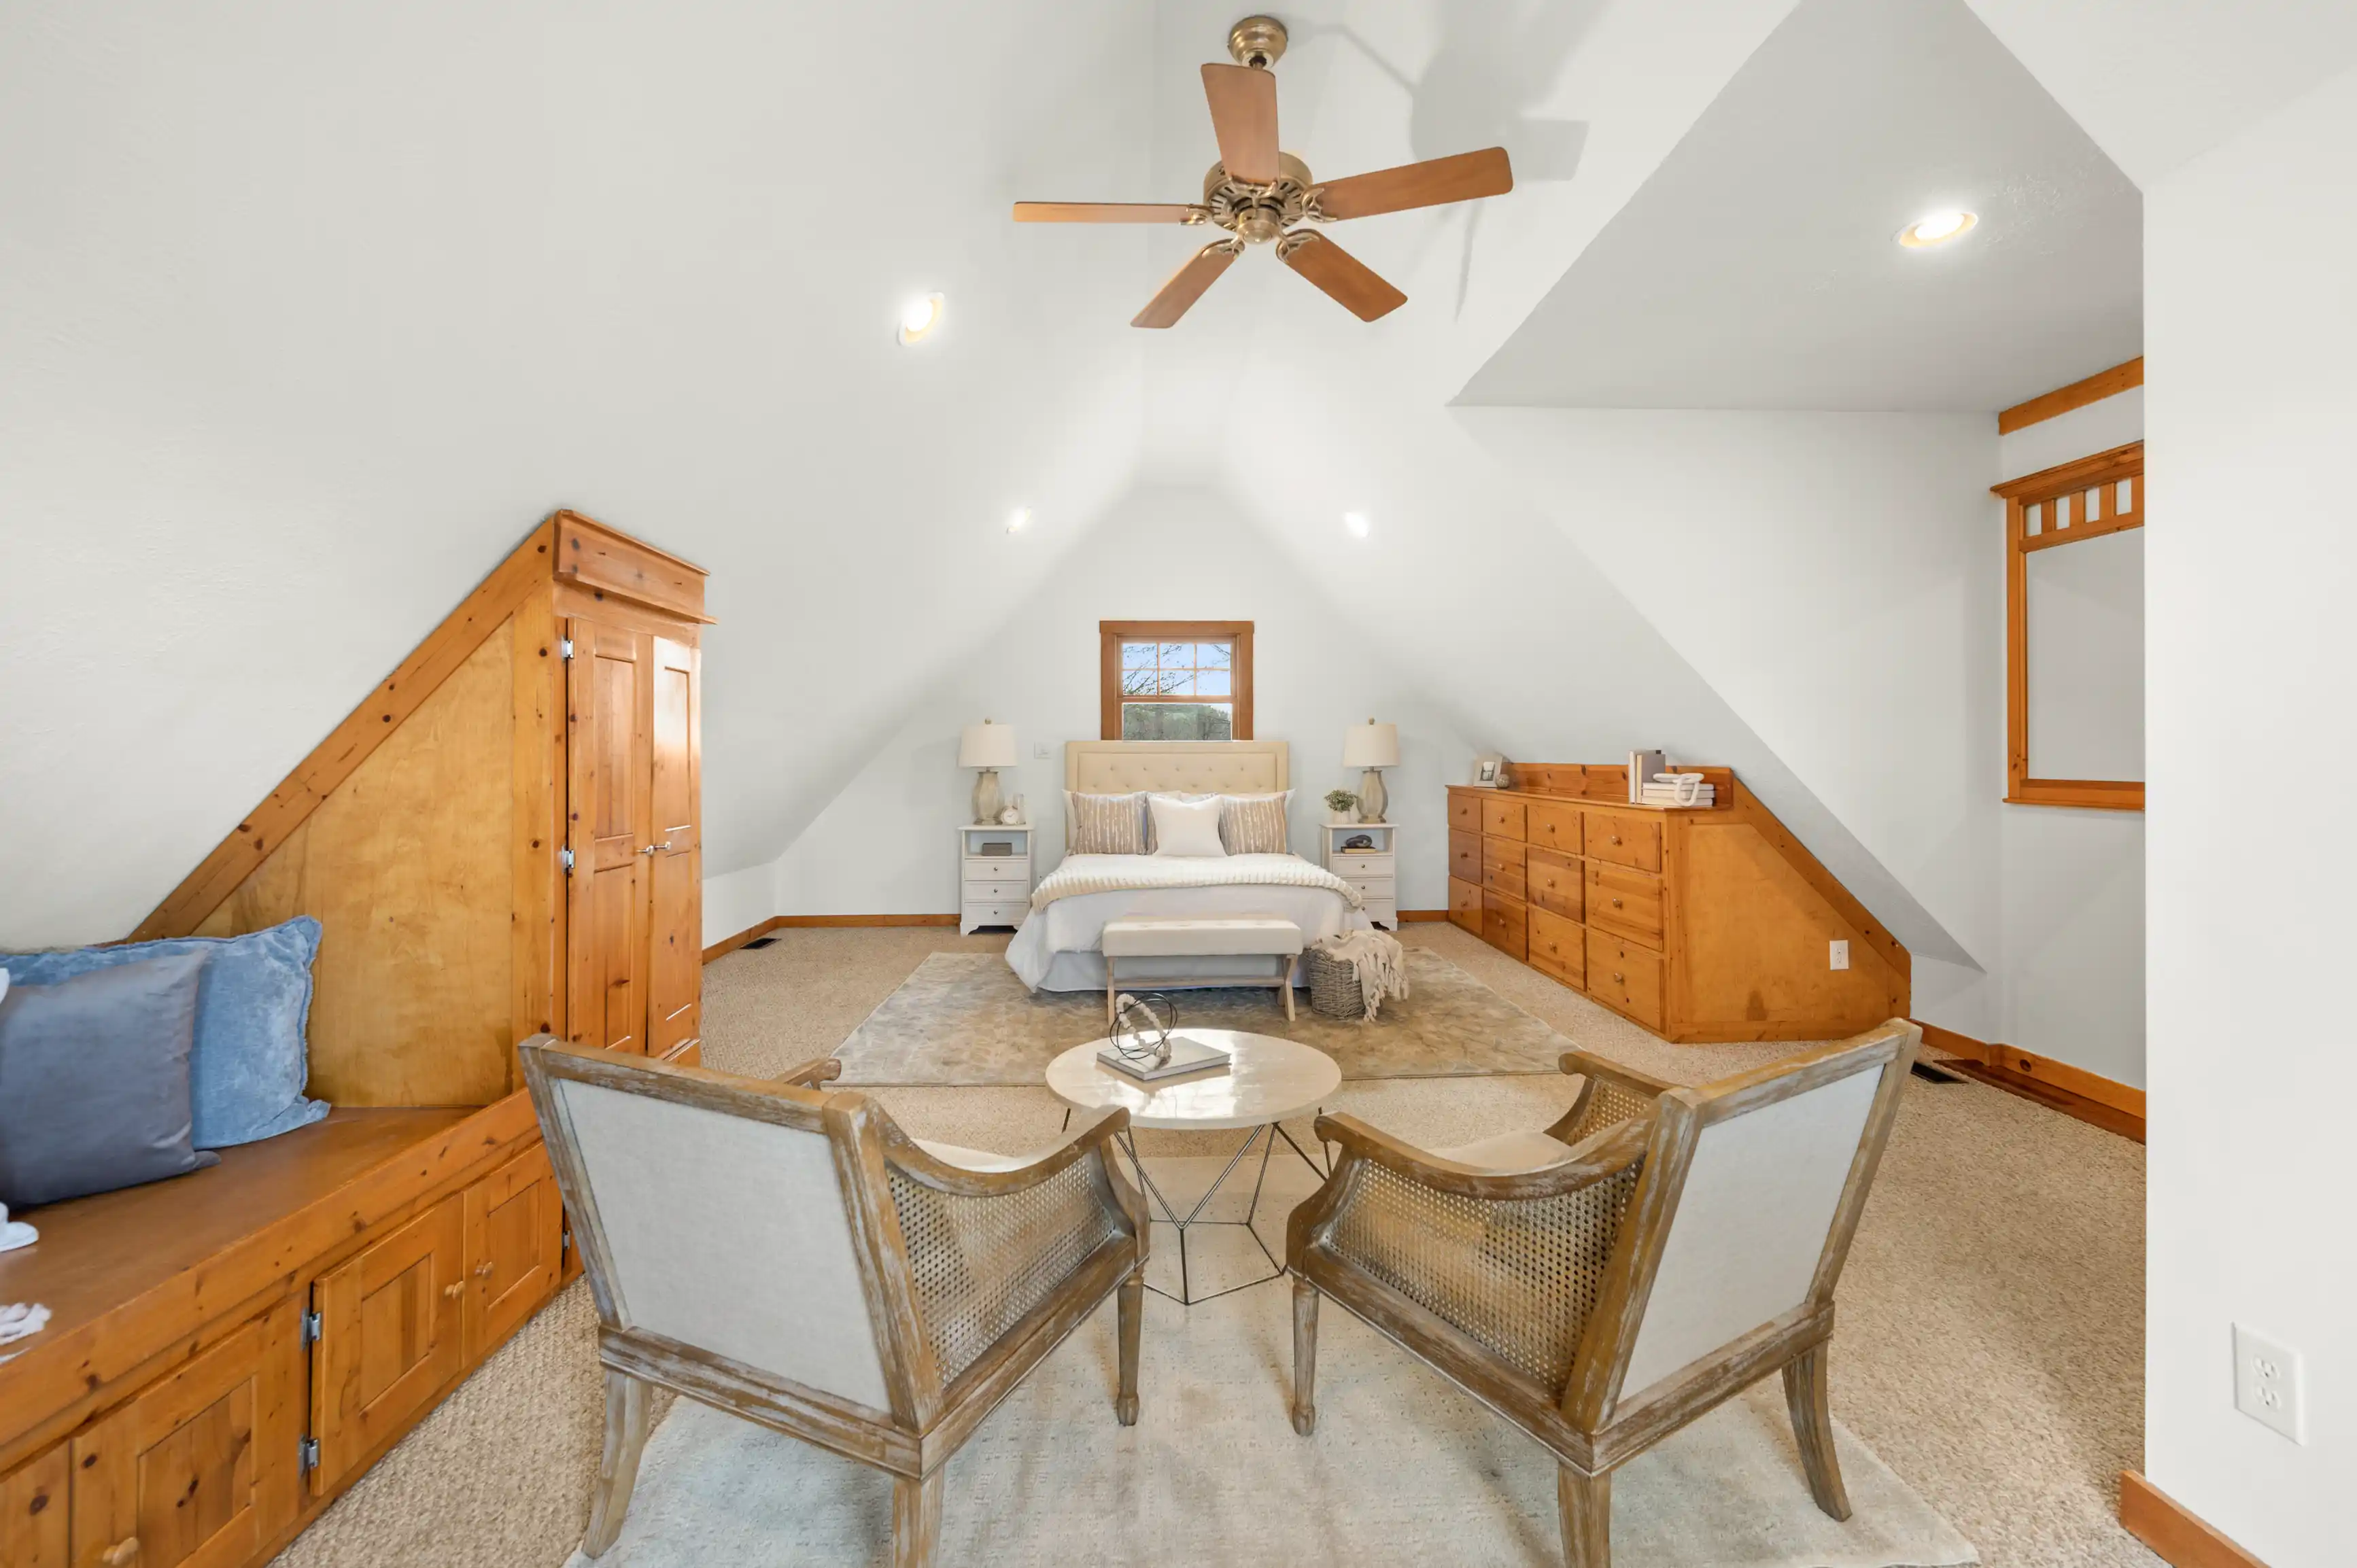 Bright and airy attic bedroom with vaulted ceilings, ceiling fan, wooden furniture including a bed with white bedding, dresser, and built-in storage bench, accented with a small round table and two chairs on a beige carpet.